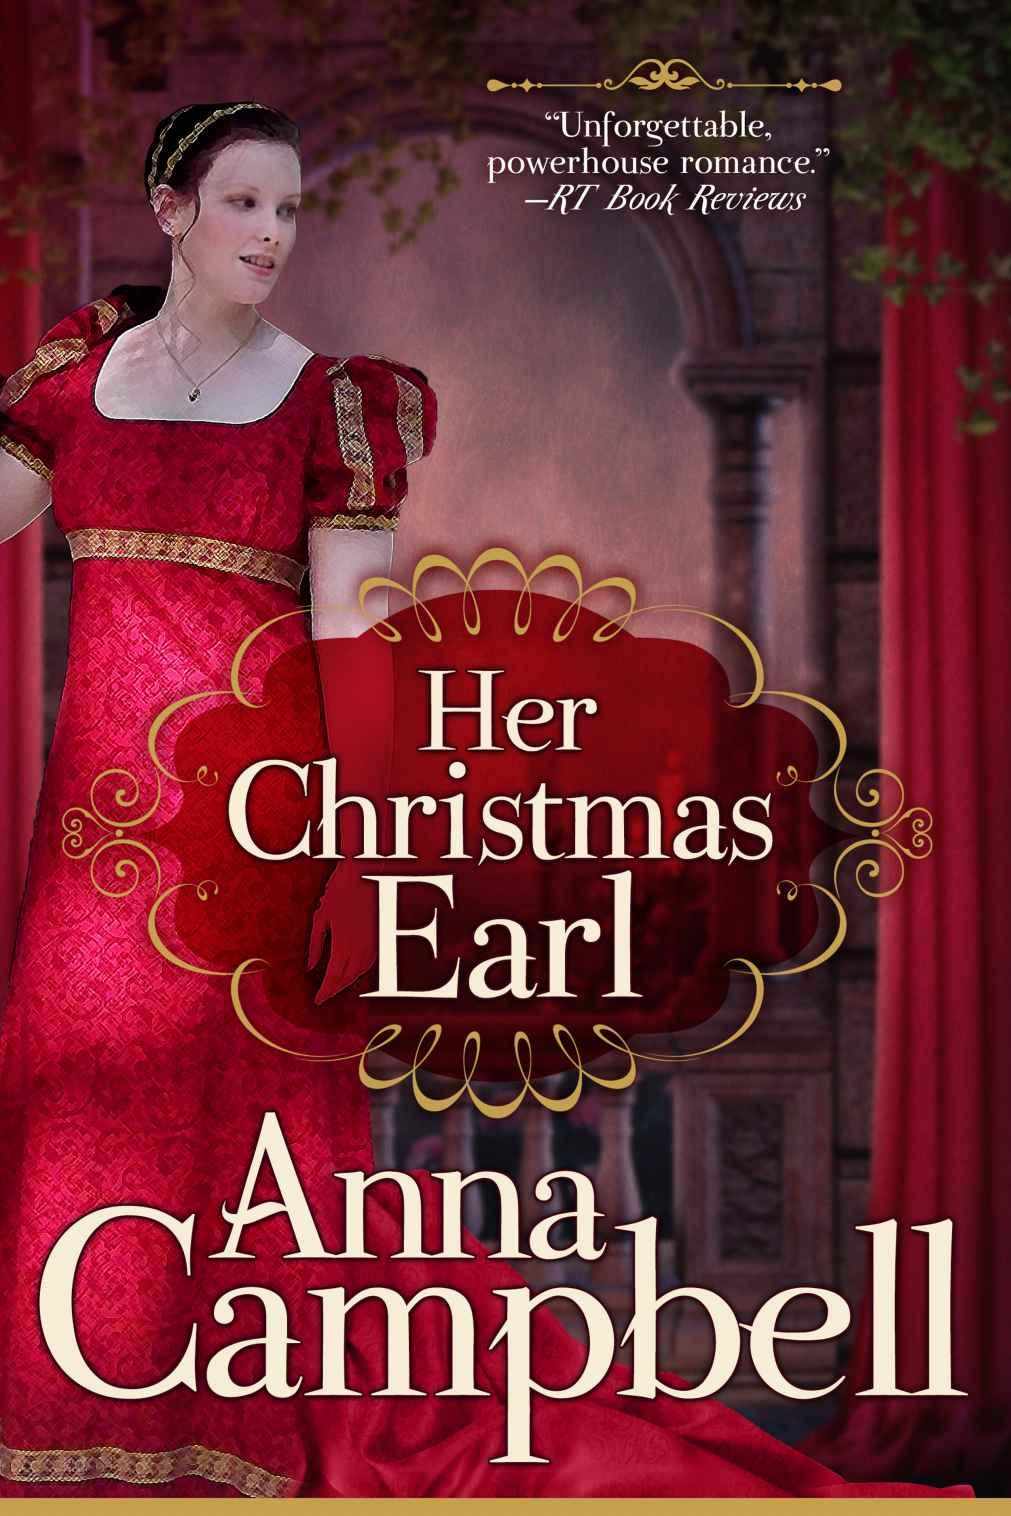 Her Christmas Earl by Anna Campbell